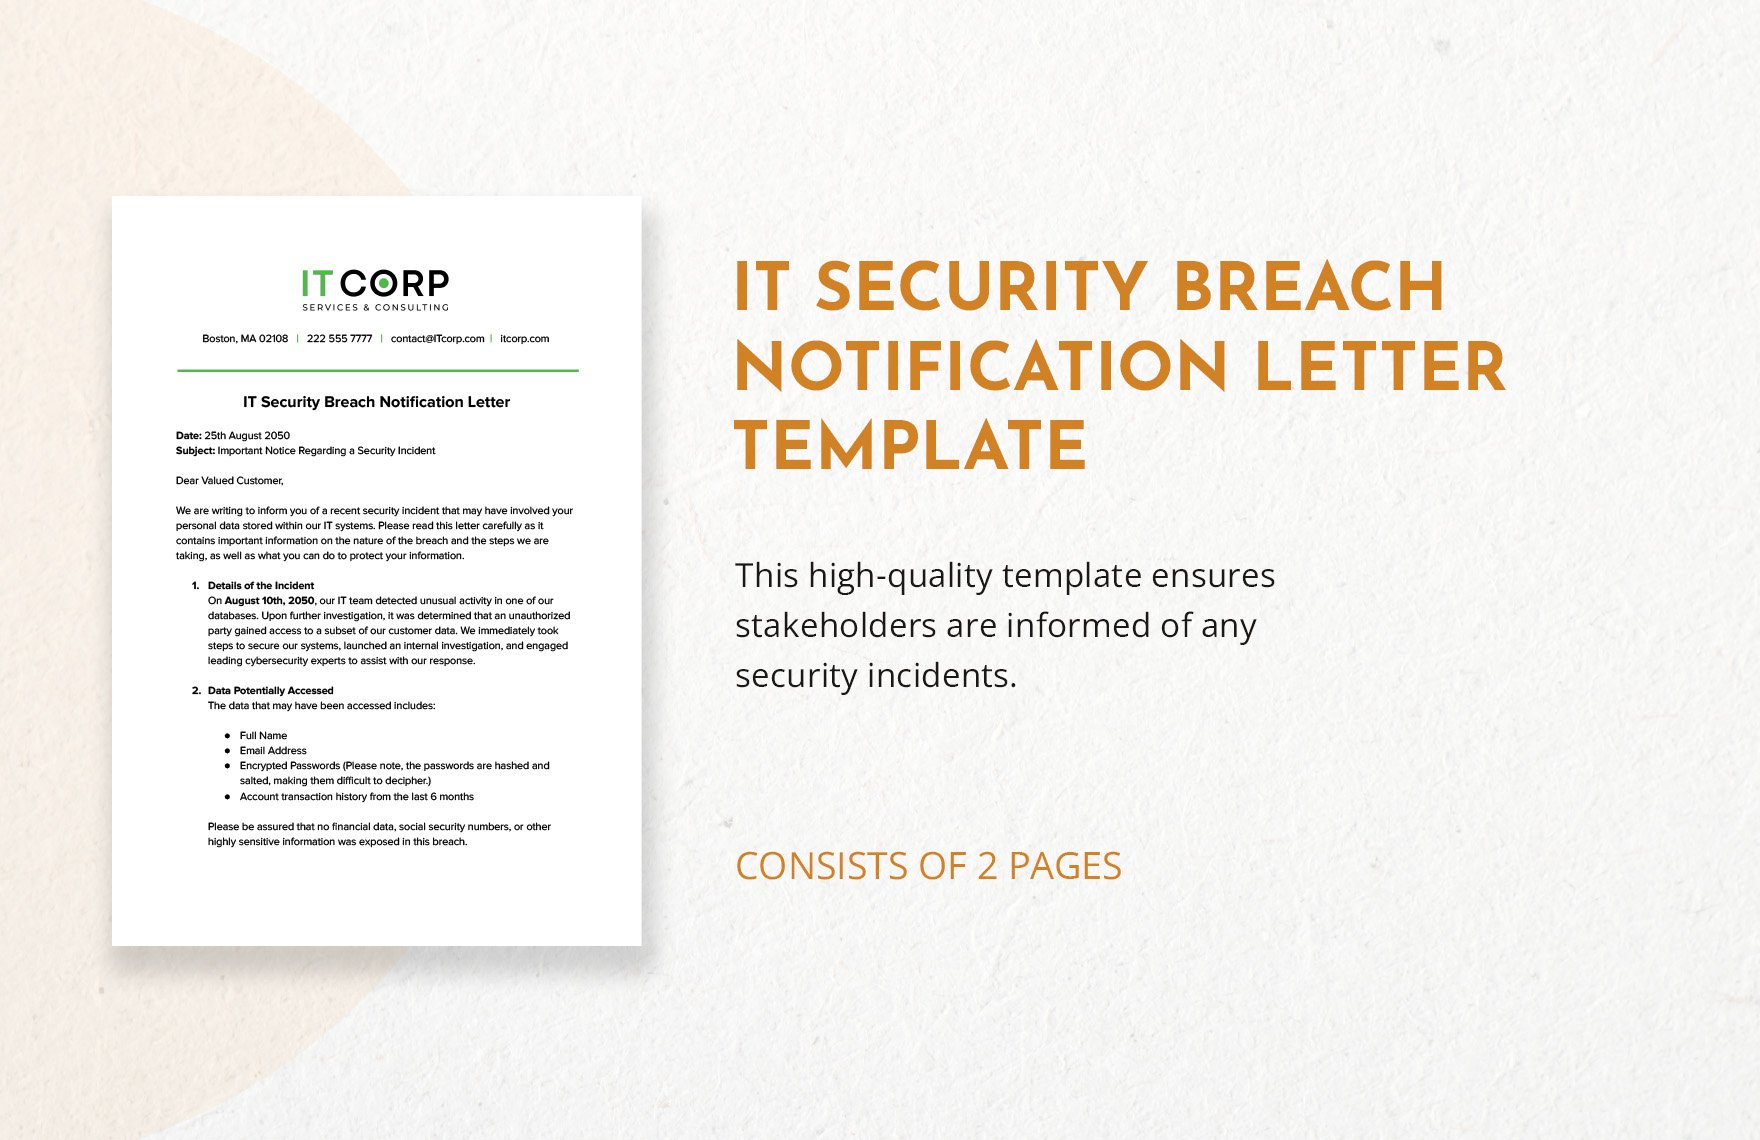 IT Security Breach Notification Letter Template